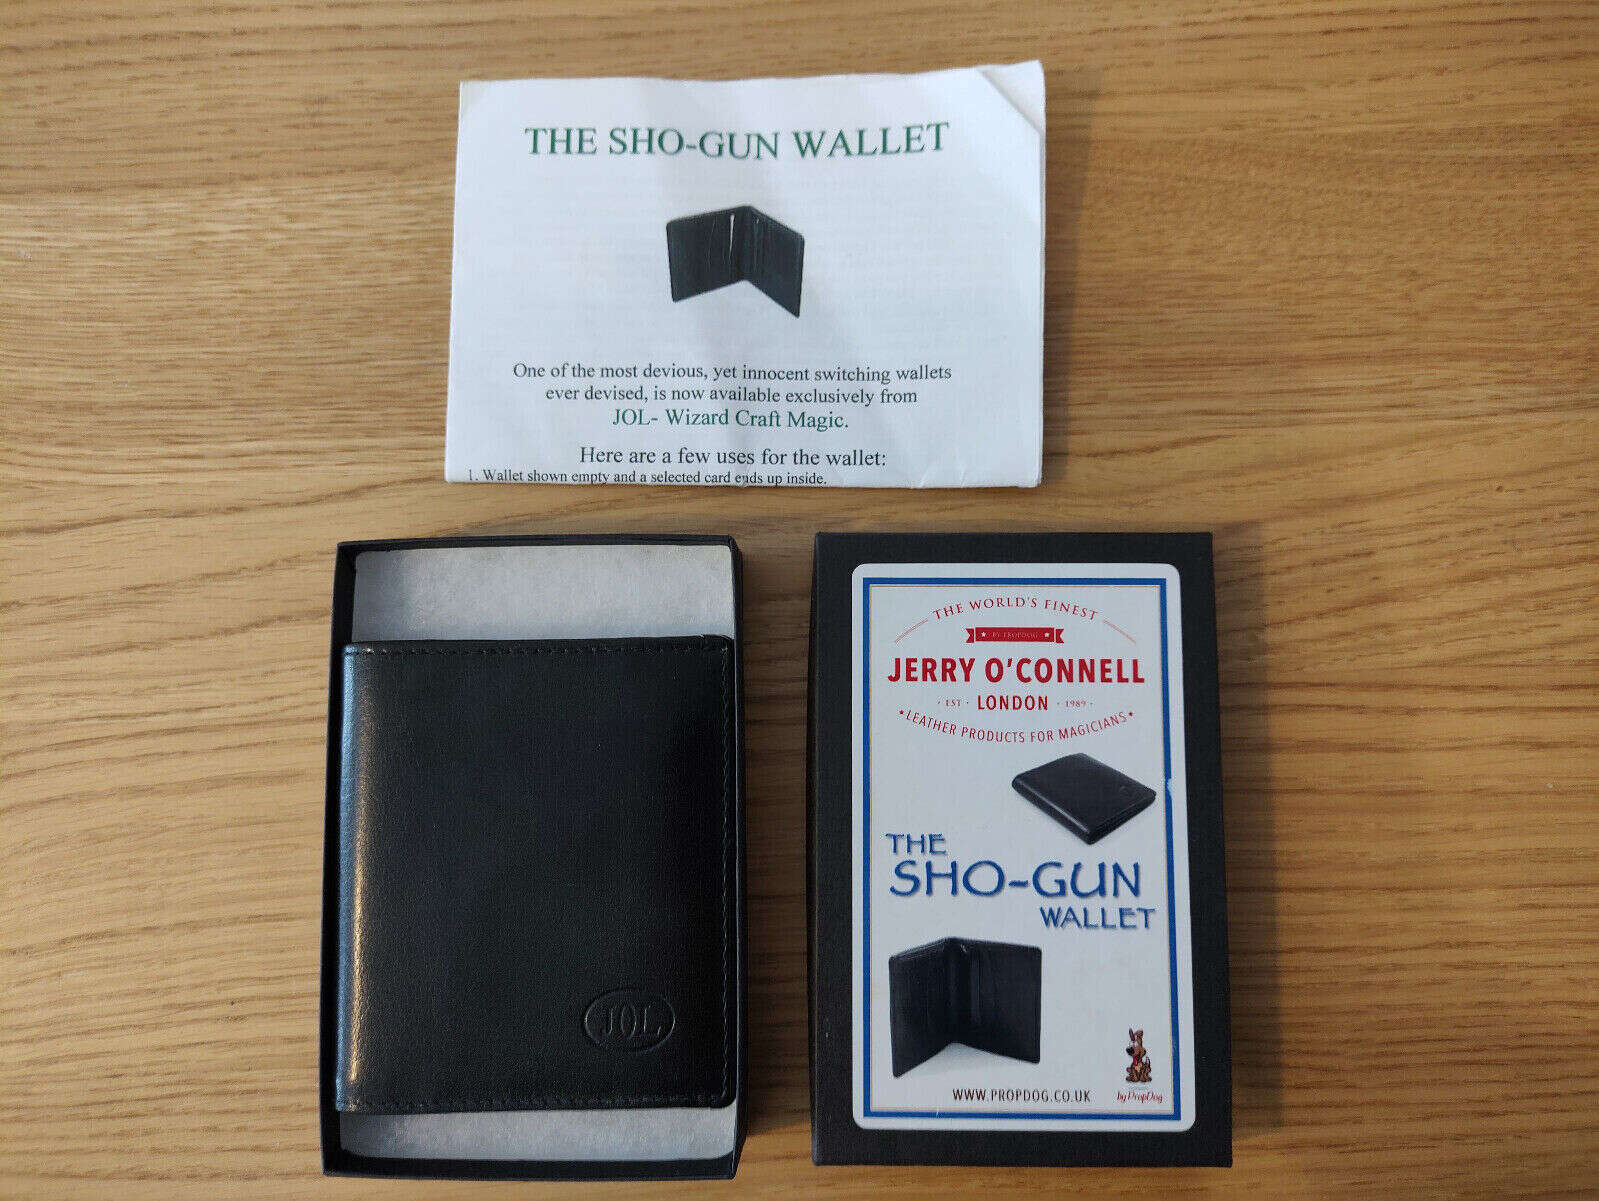 Sho-Gun Wallet by Jerry O’Connel & Propdog in box with box lid and leaflet